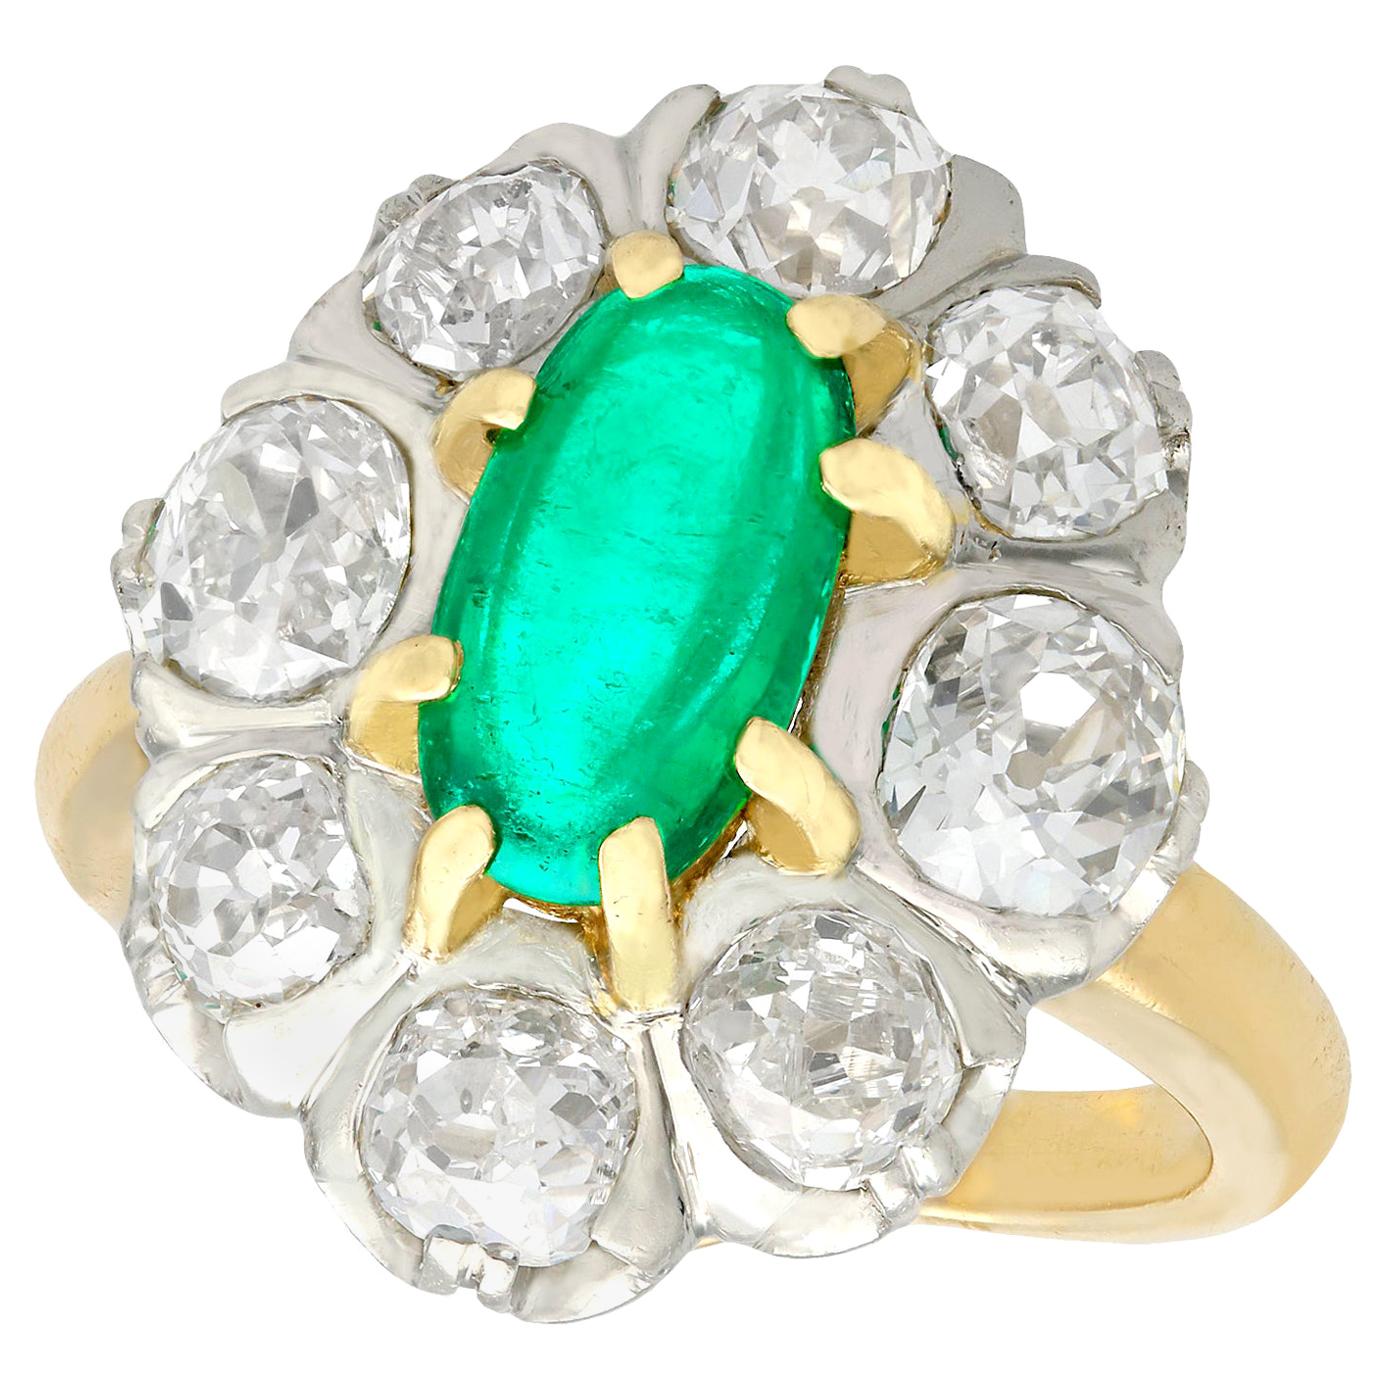 1920s 1.50ct Cabochon Cut Emerald and 2.85ct Diamond Gold Engagement Ring